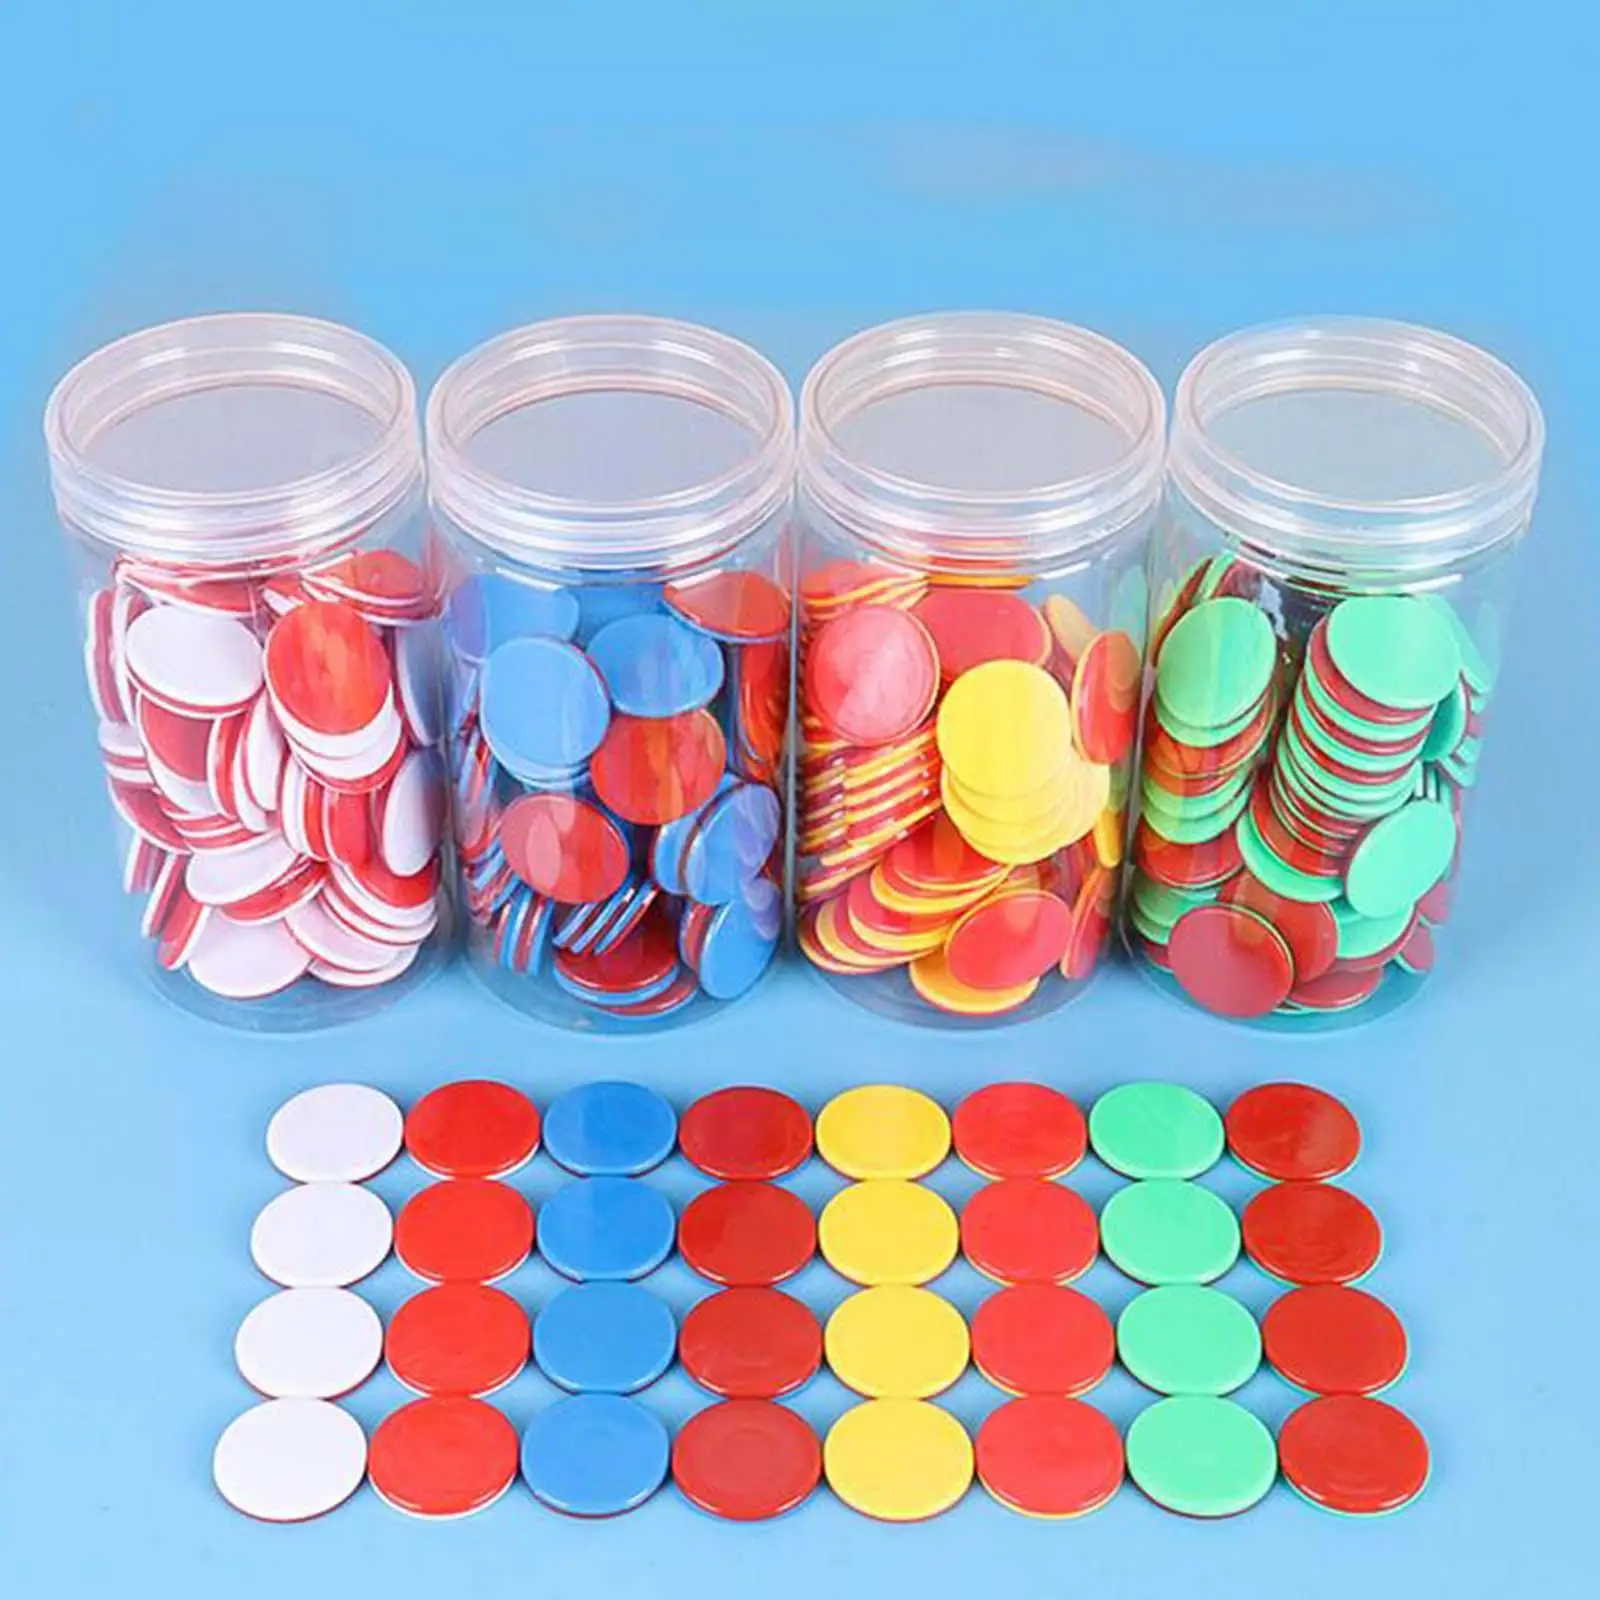 100x Two Color Counters Counting Bingo Chip for Game Preschool Classroom